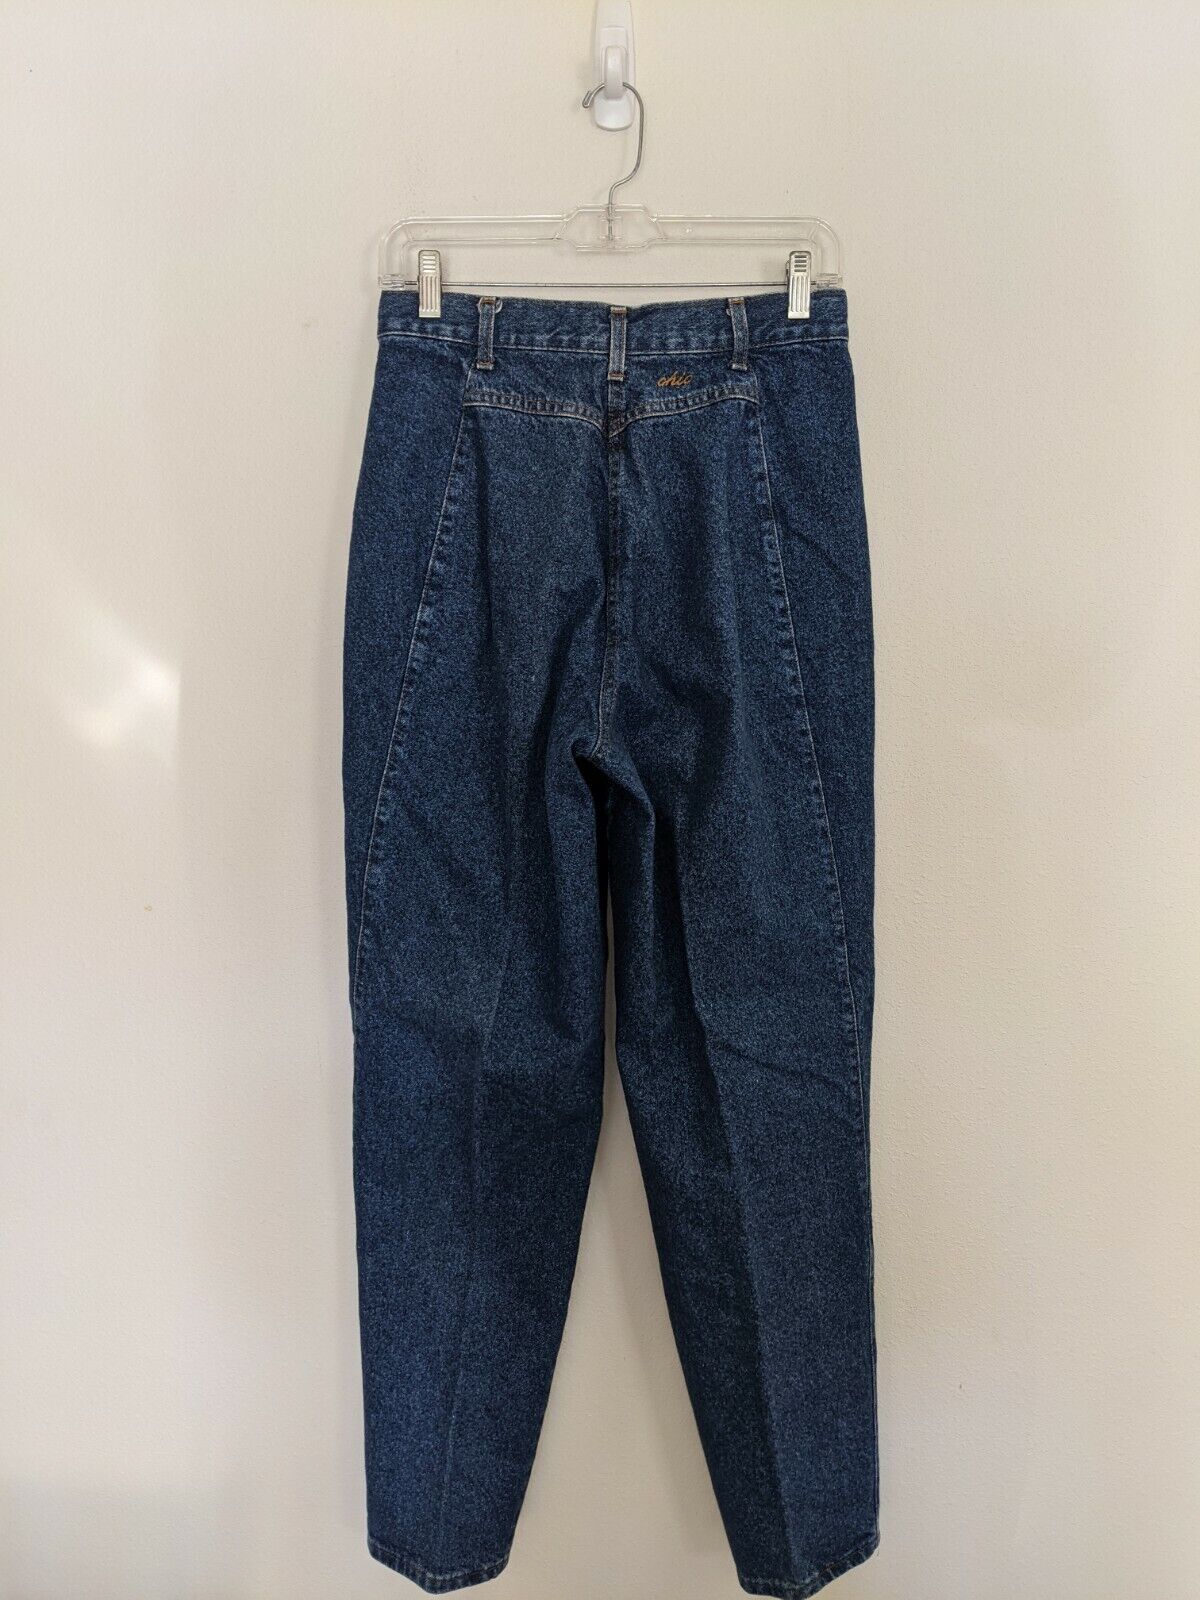 Vintage 80s 90s Chic Size 11 High Waist Mom Jeans… - image 5